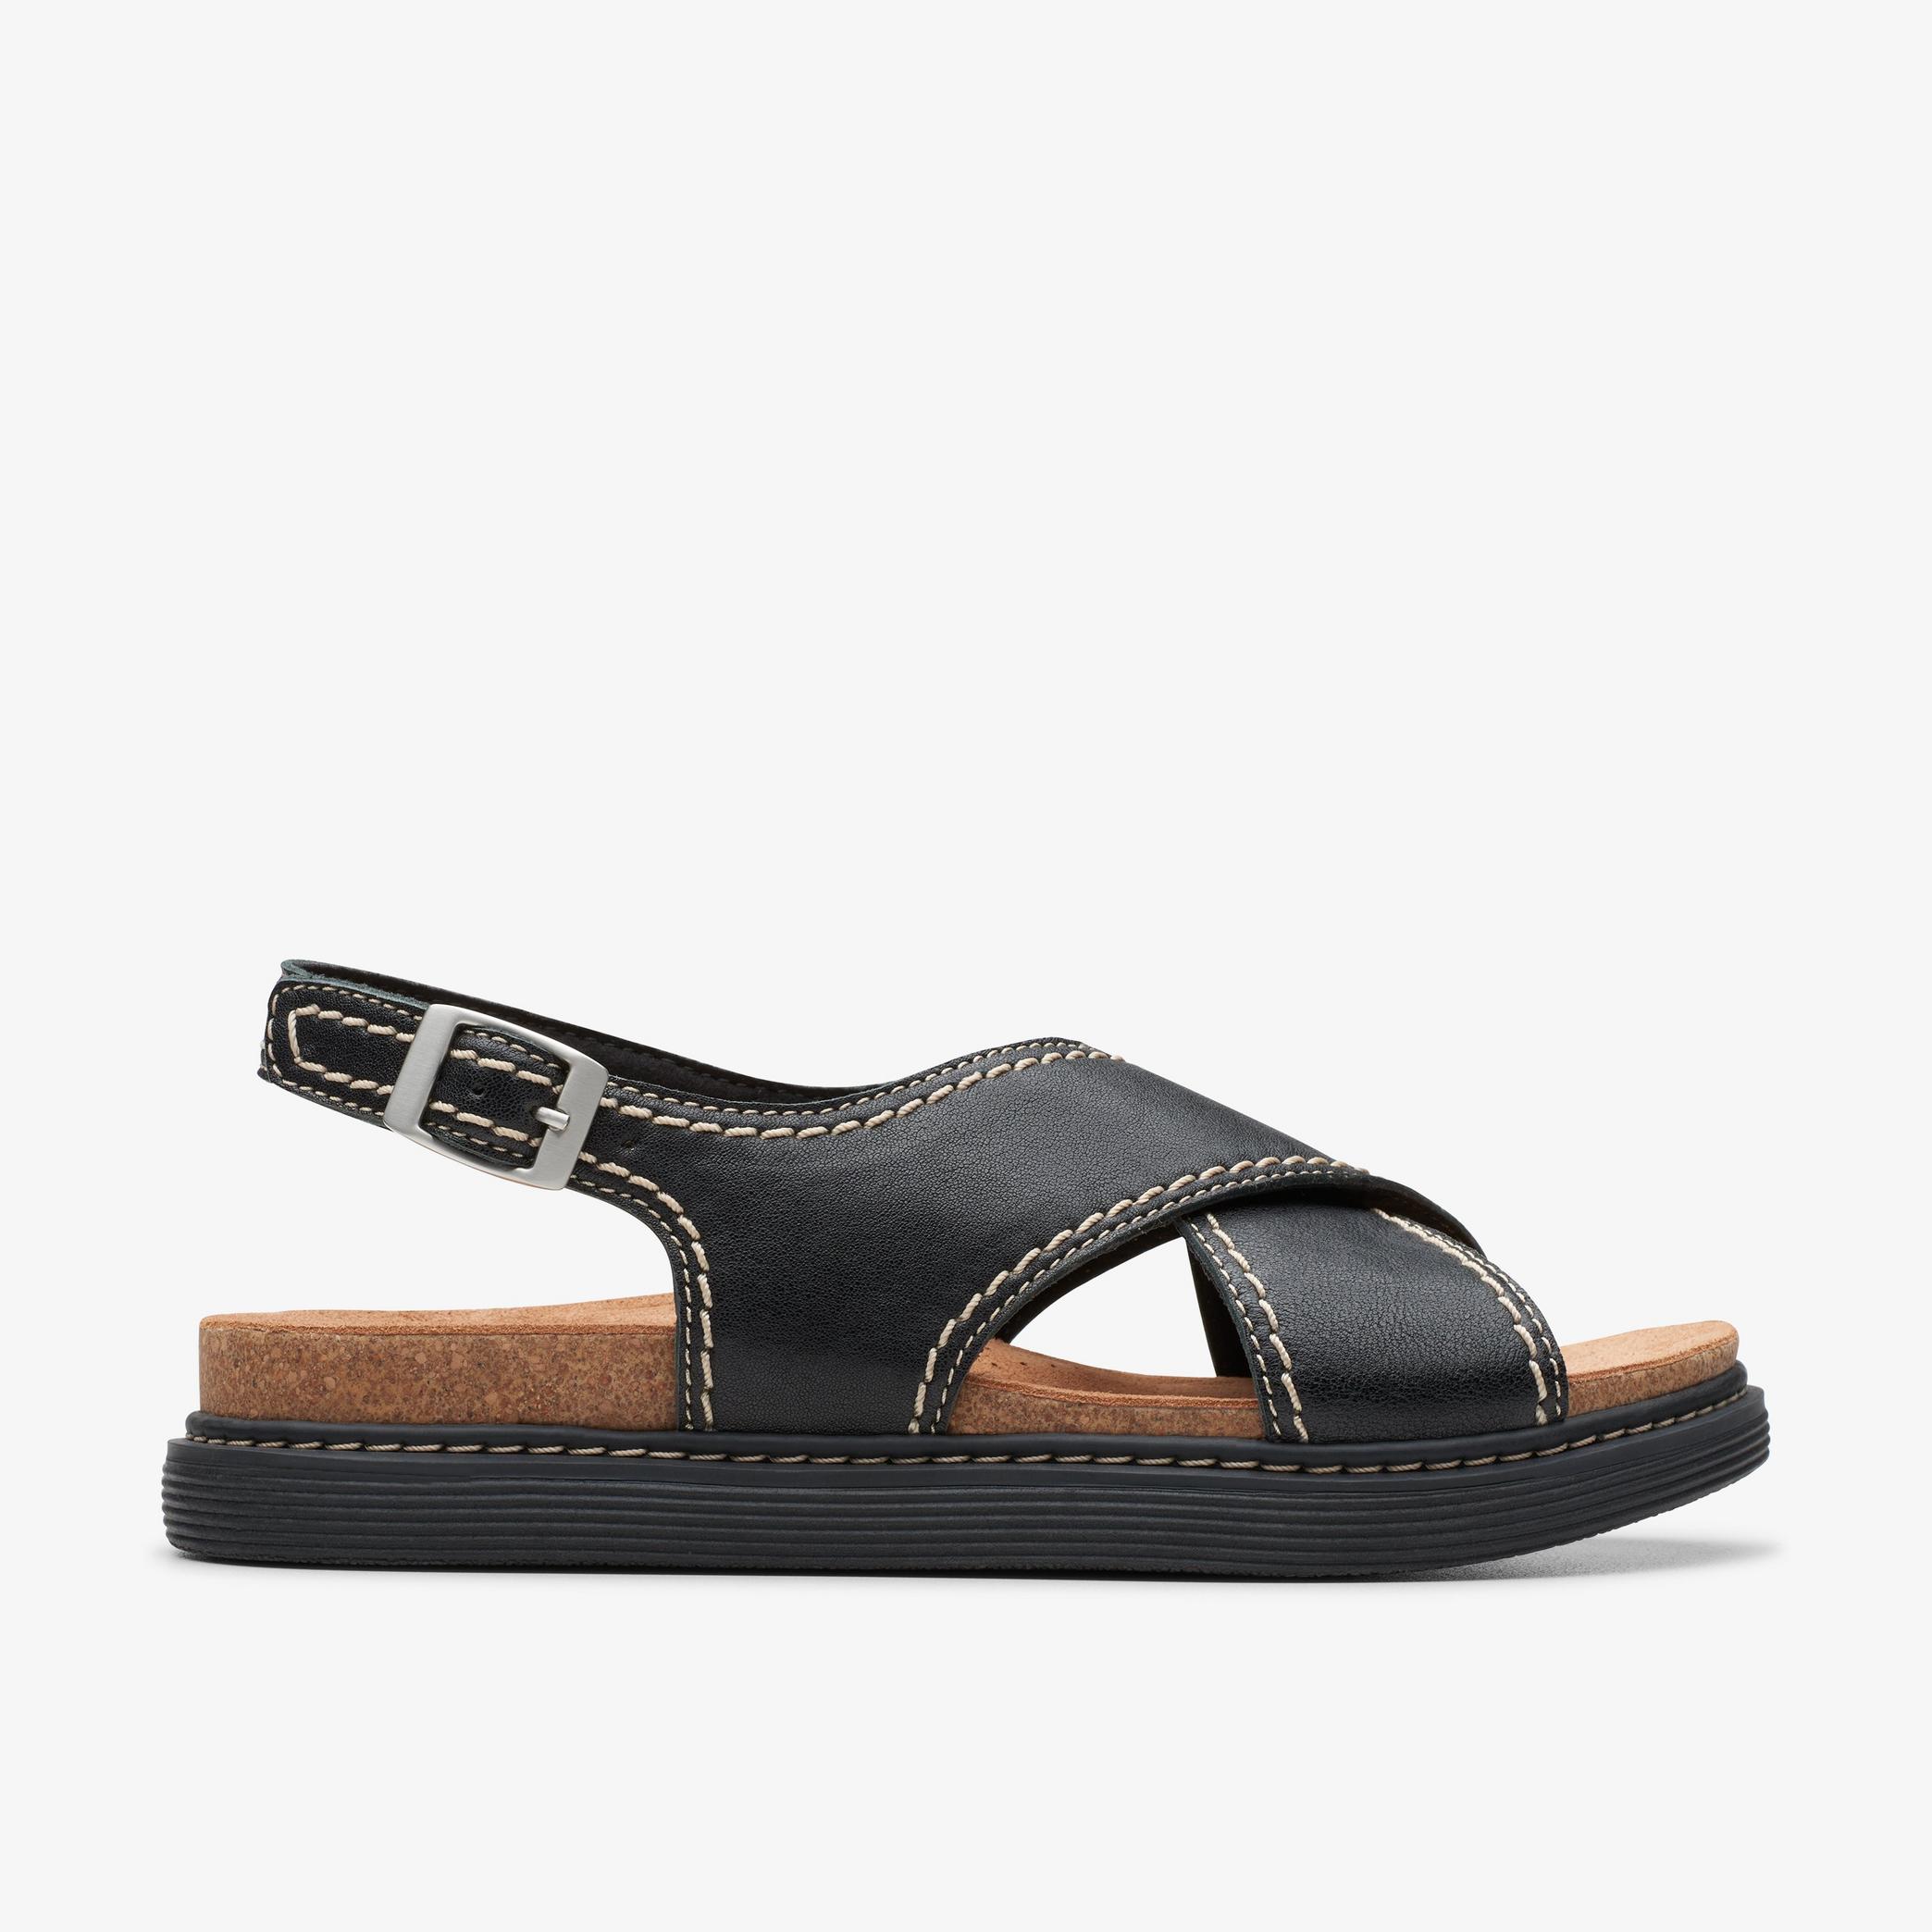 Arwell Sling Black Leather Flat Sandals, view 1 of 6